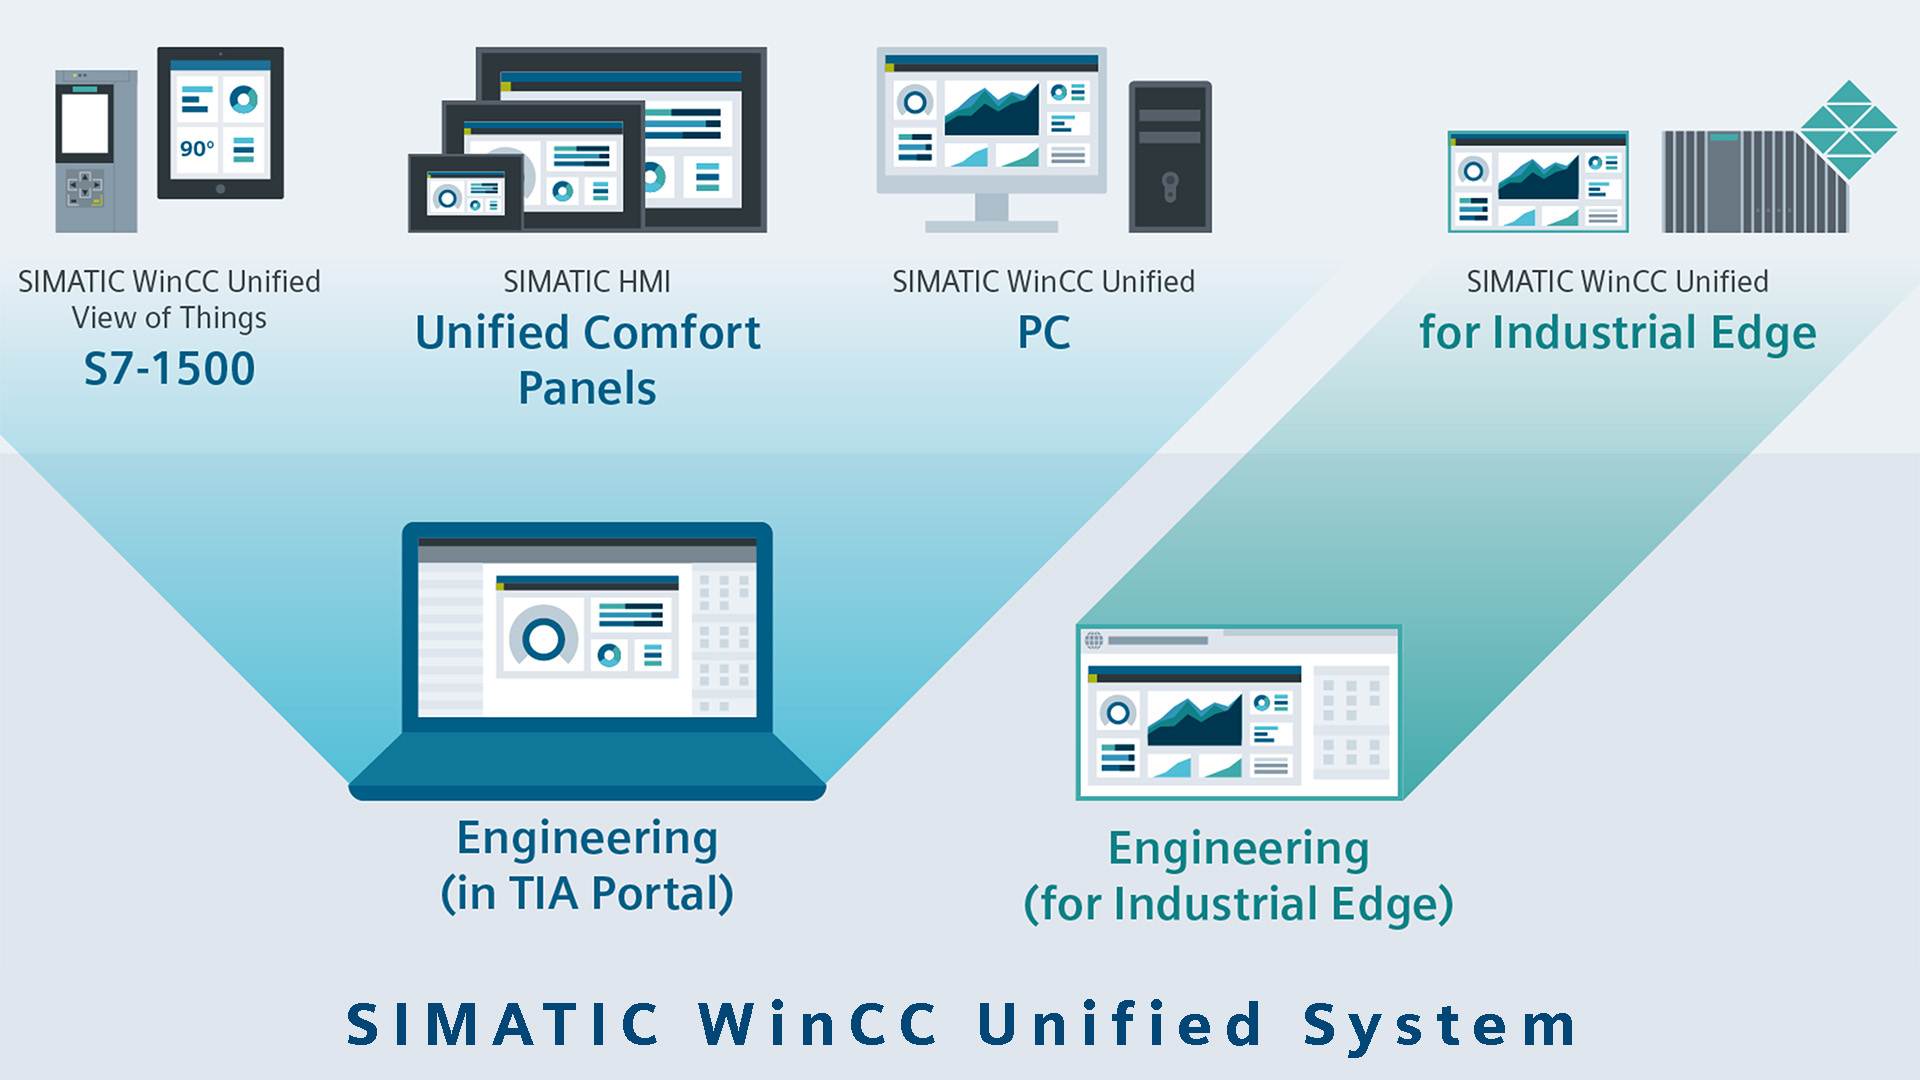 SIMATIC WinCC Unified System